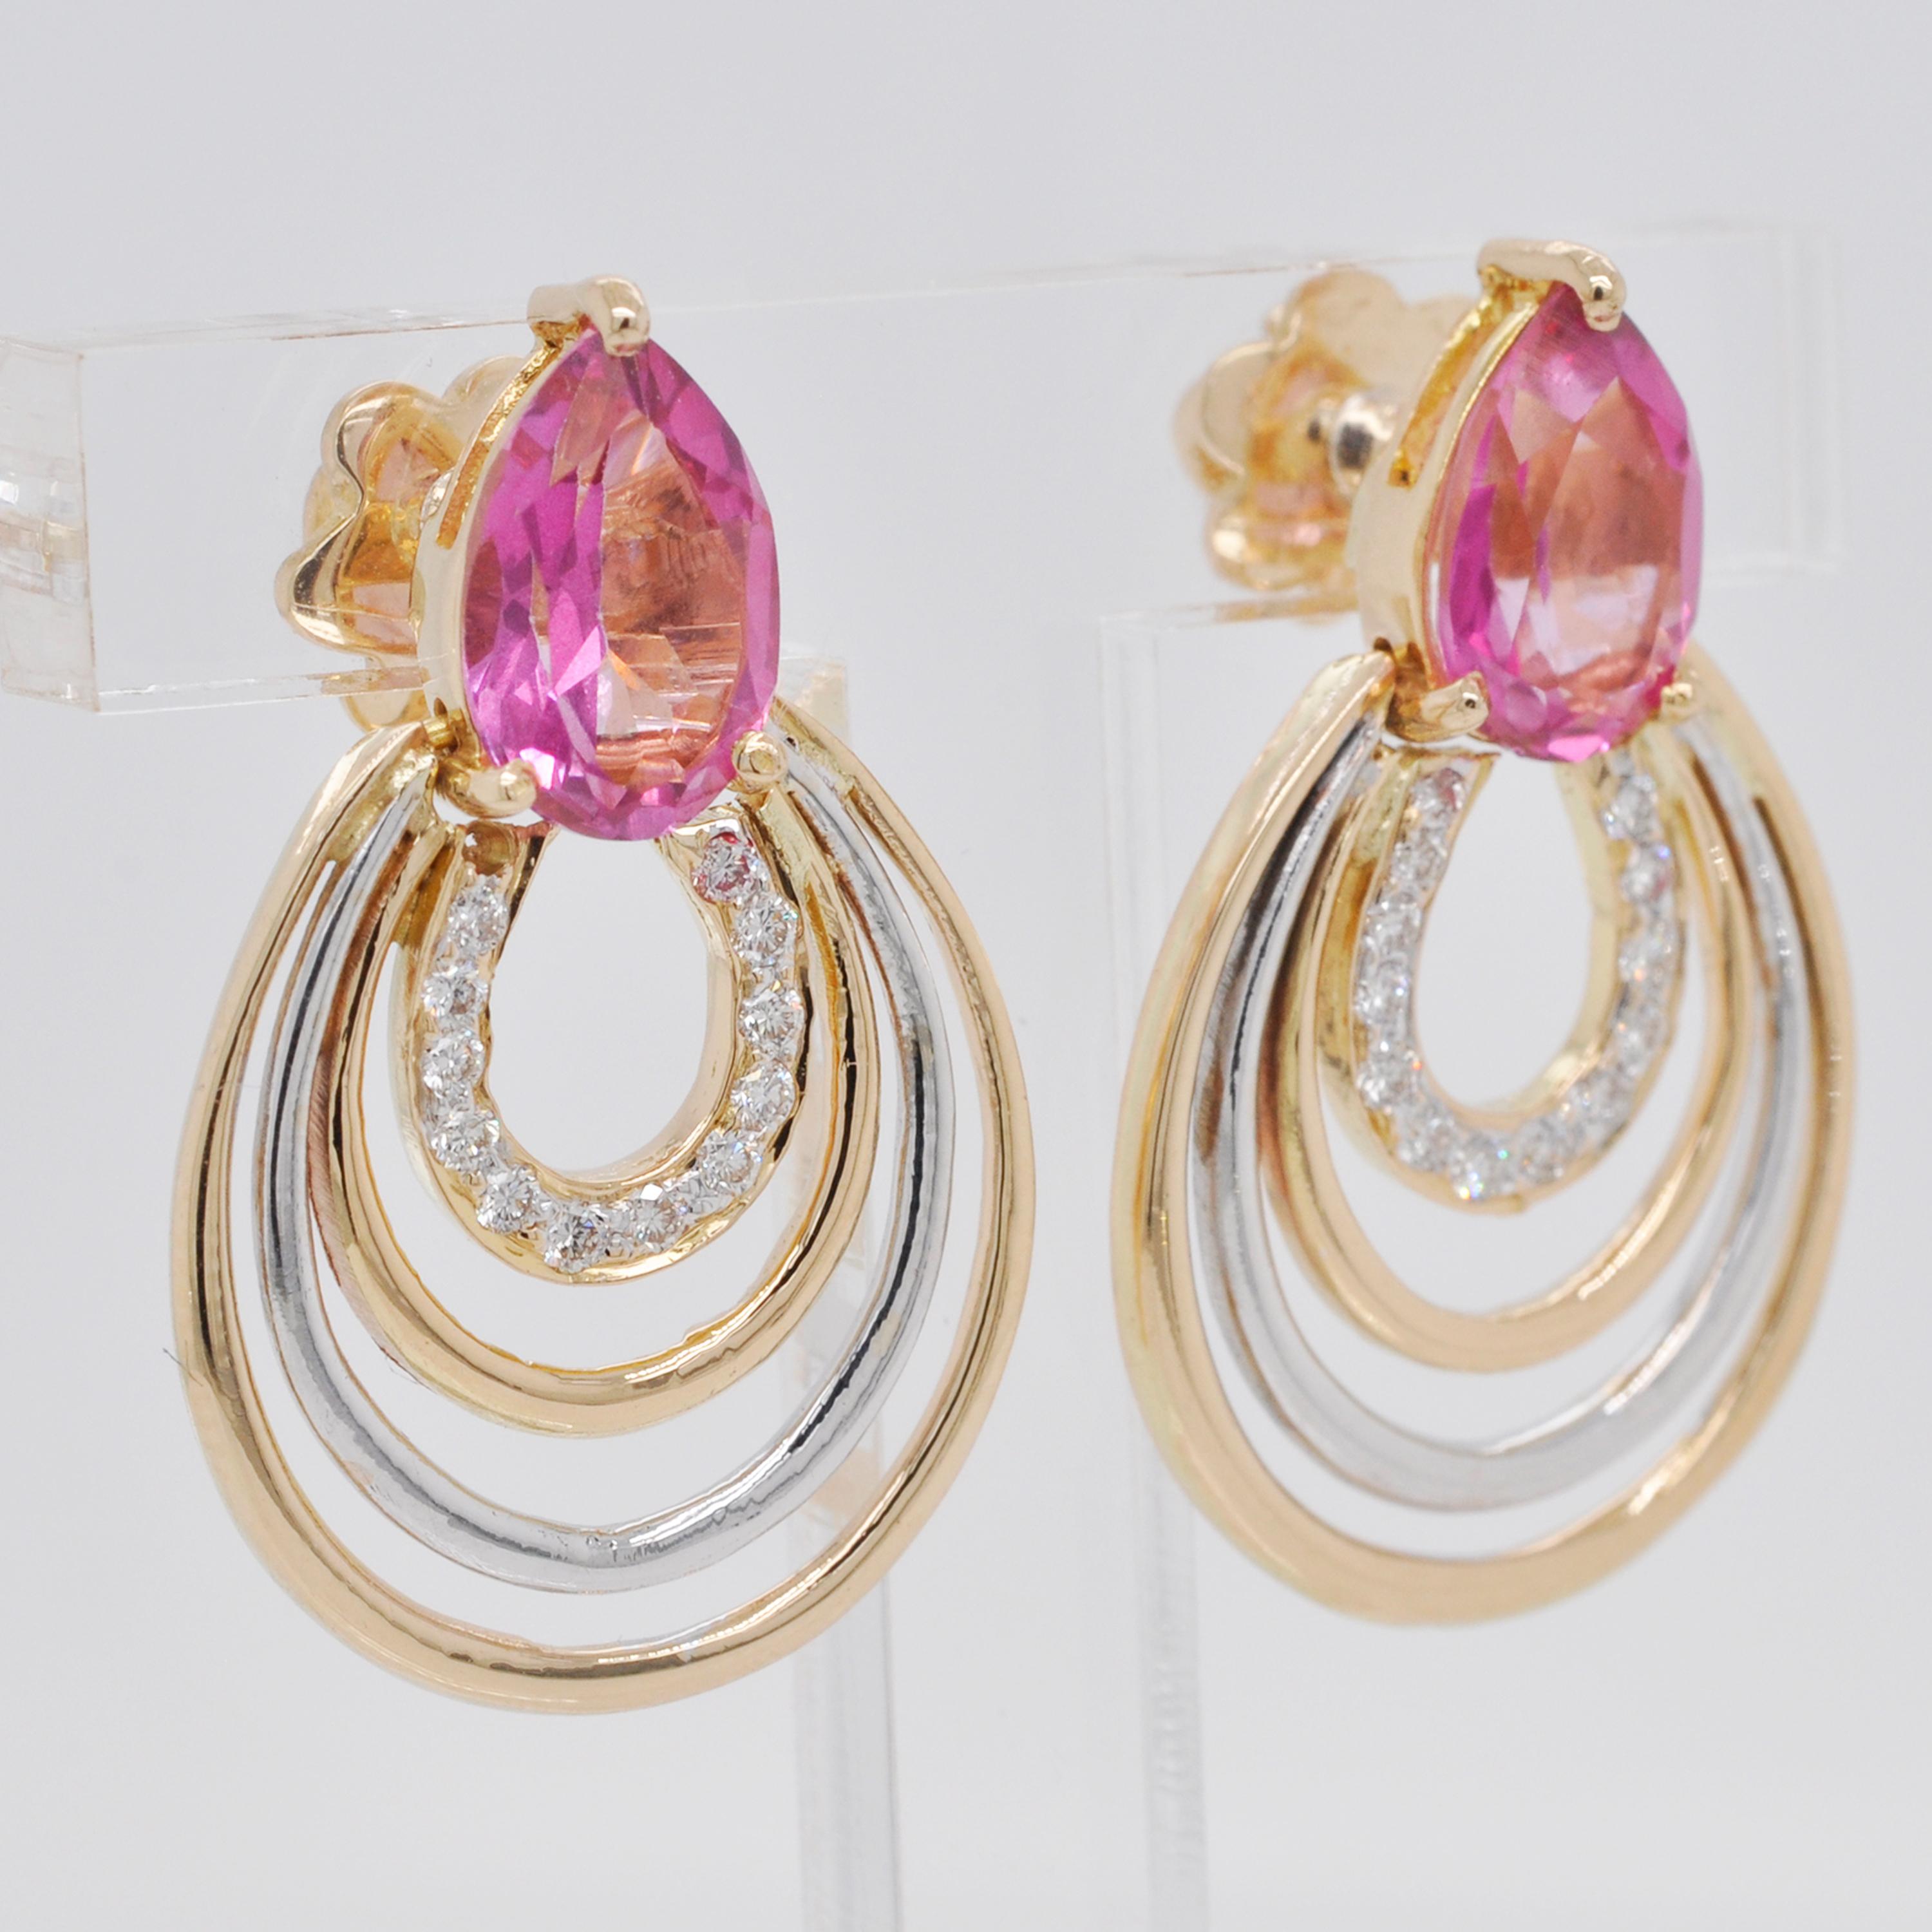 18 karat yellow gold pear shaped pink tourmaline diamond drop earrings

This 18 Karat gold dangle earrings pair is extremely elegant yet stylish. Featuring a lustrous pear shaped pink tourmaline on top, the diamond pear shaped loop extends